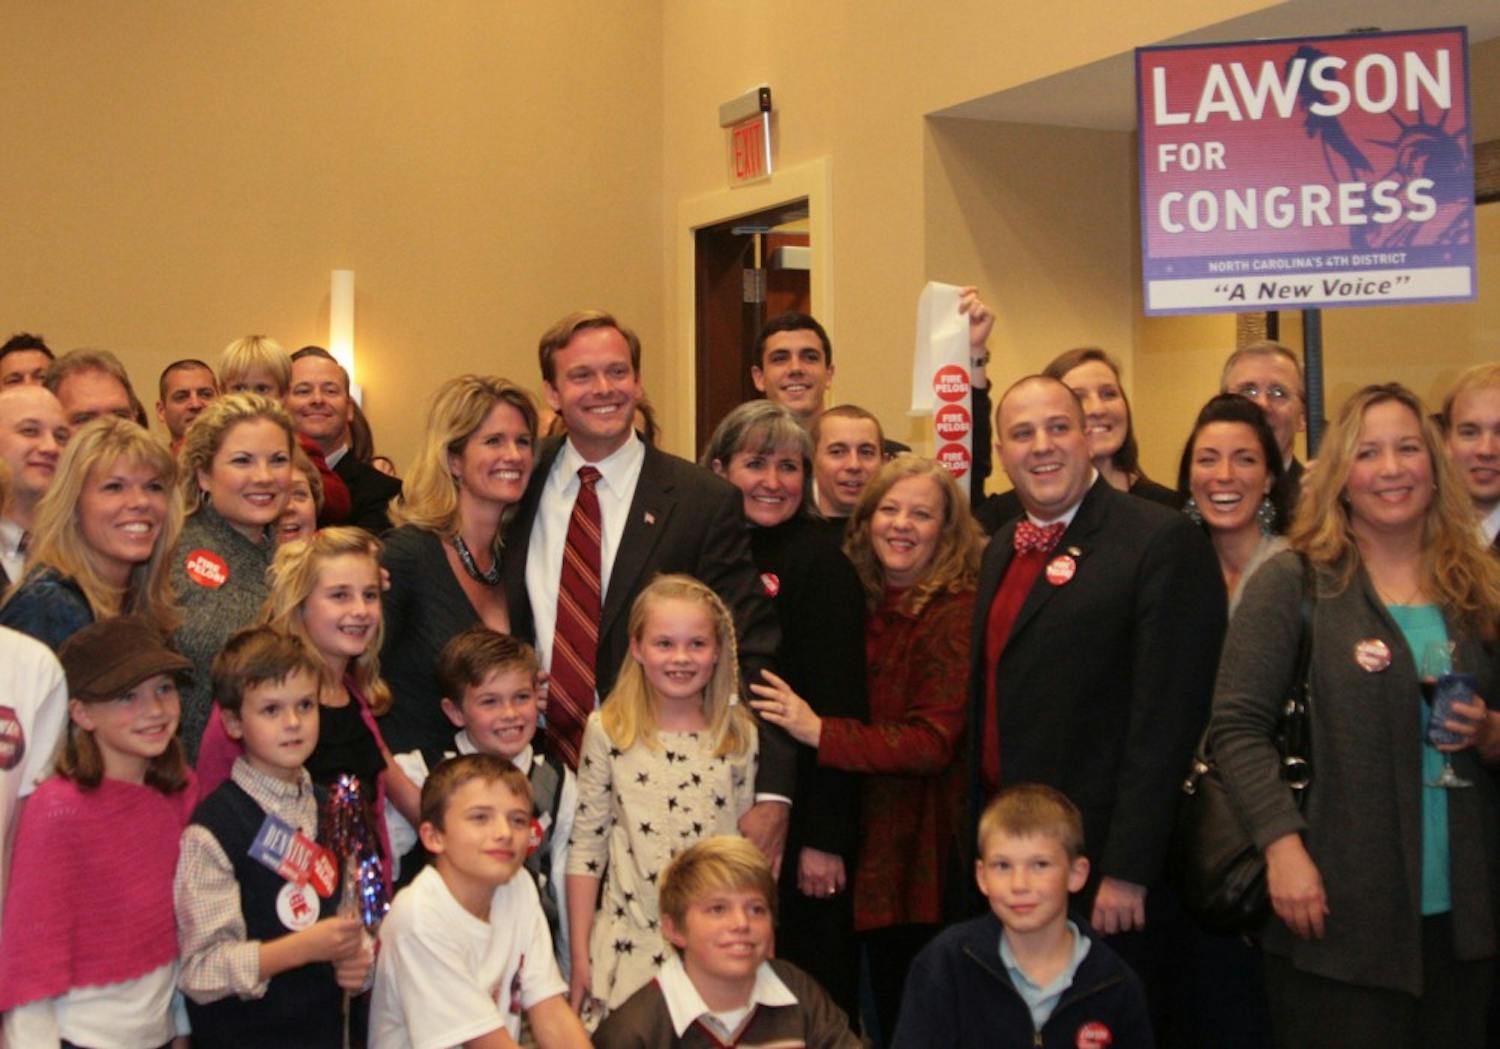 B.J. Lawson, Republican candidate for the U.S. House of Representatives, with supporters in Raleigh. 